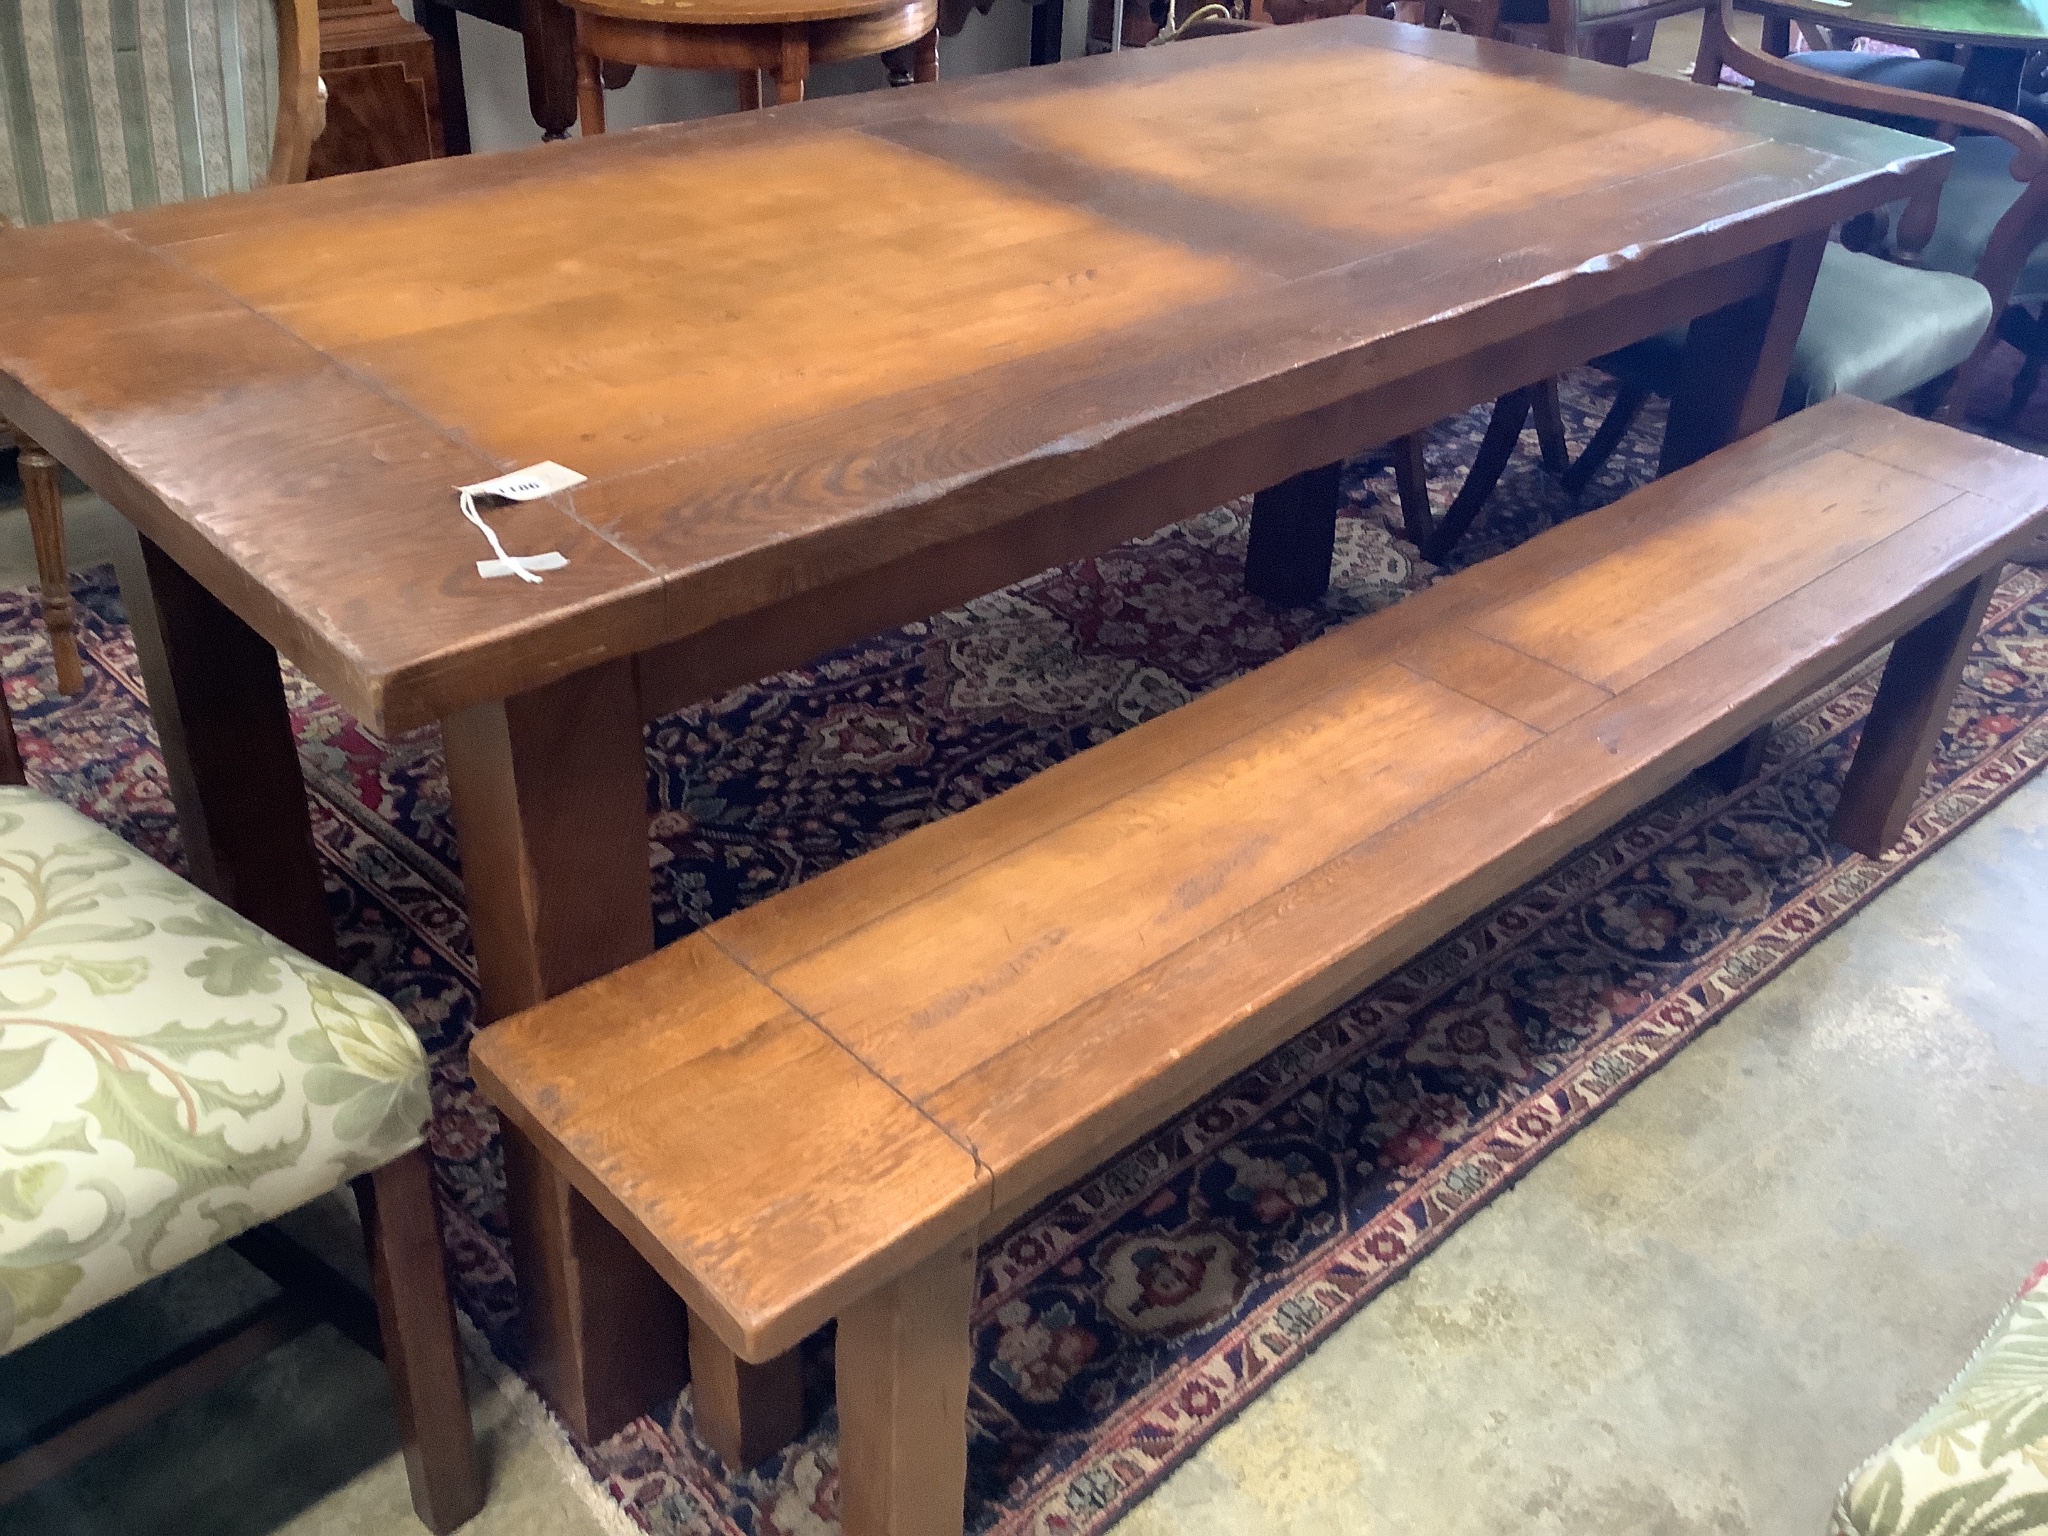 A French provincial rectangular fruitwood farmhouse table